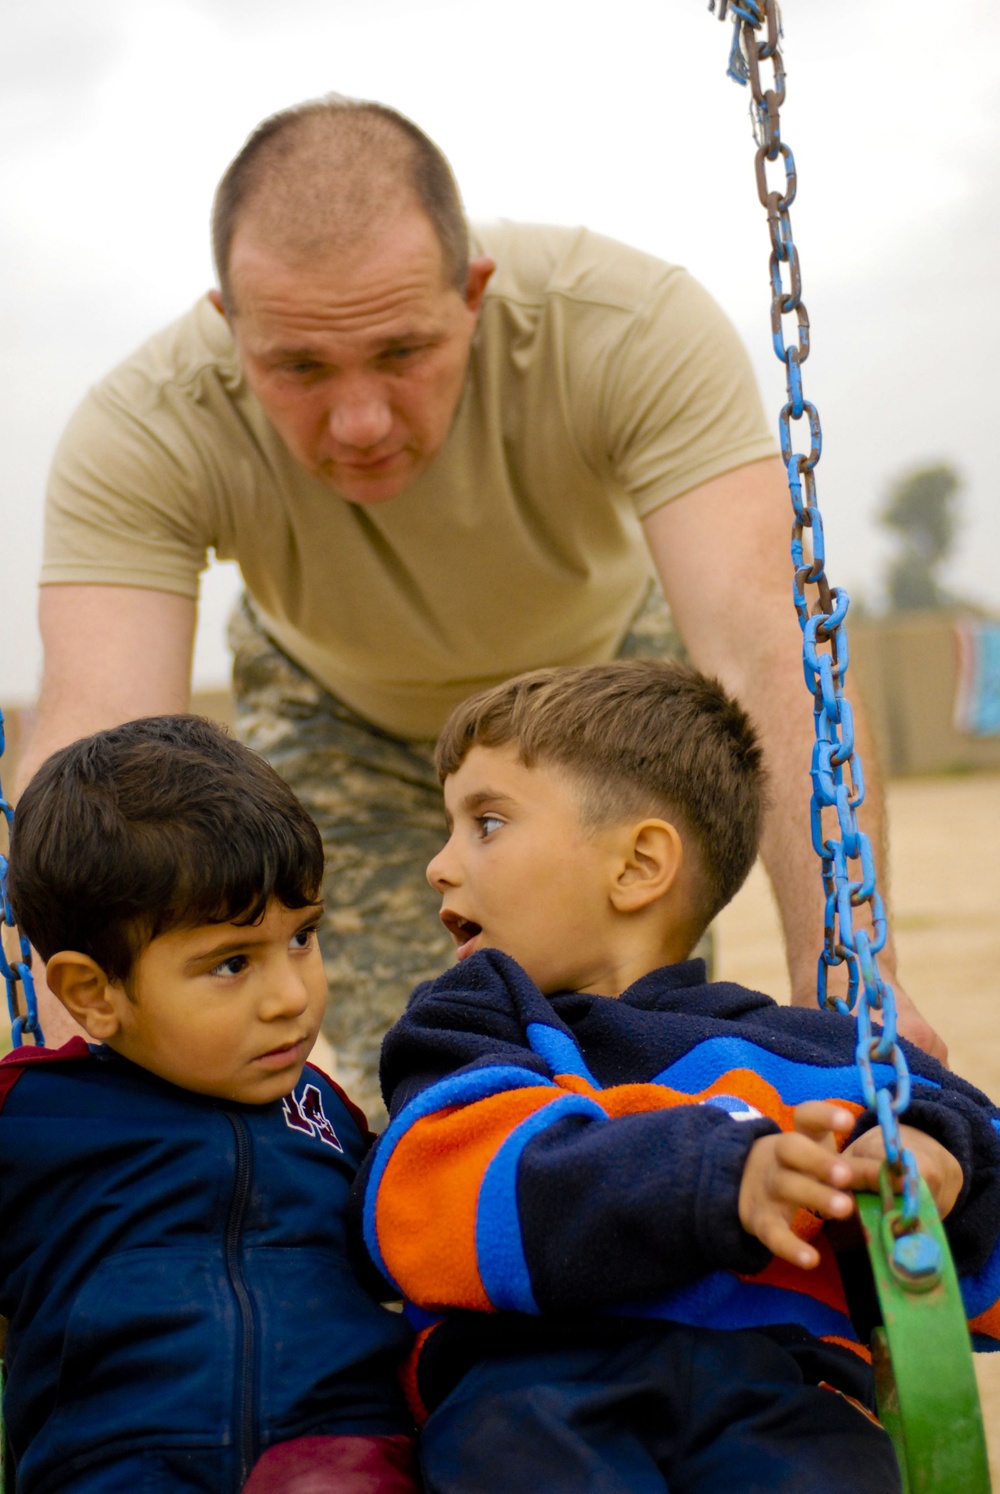 Scouting program takes life again in Iraq